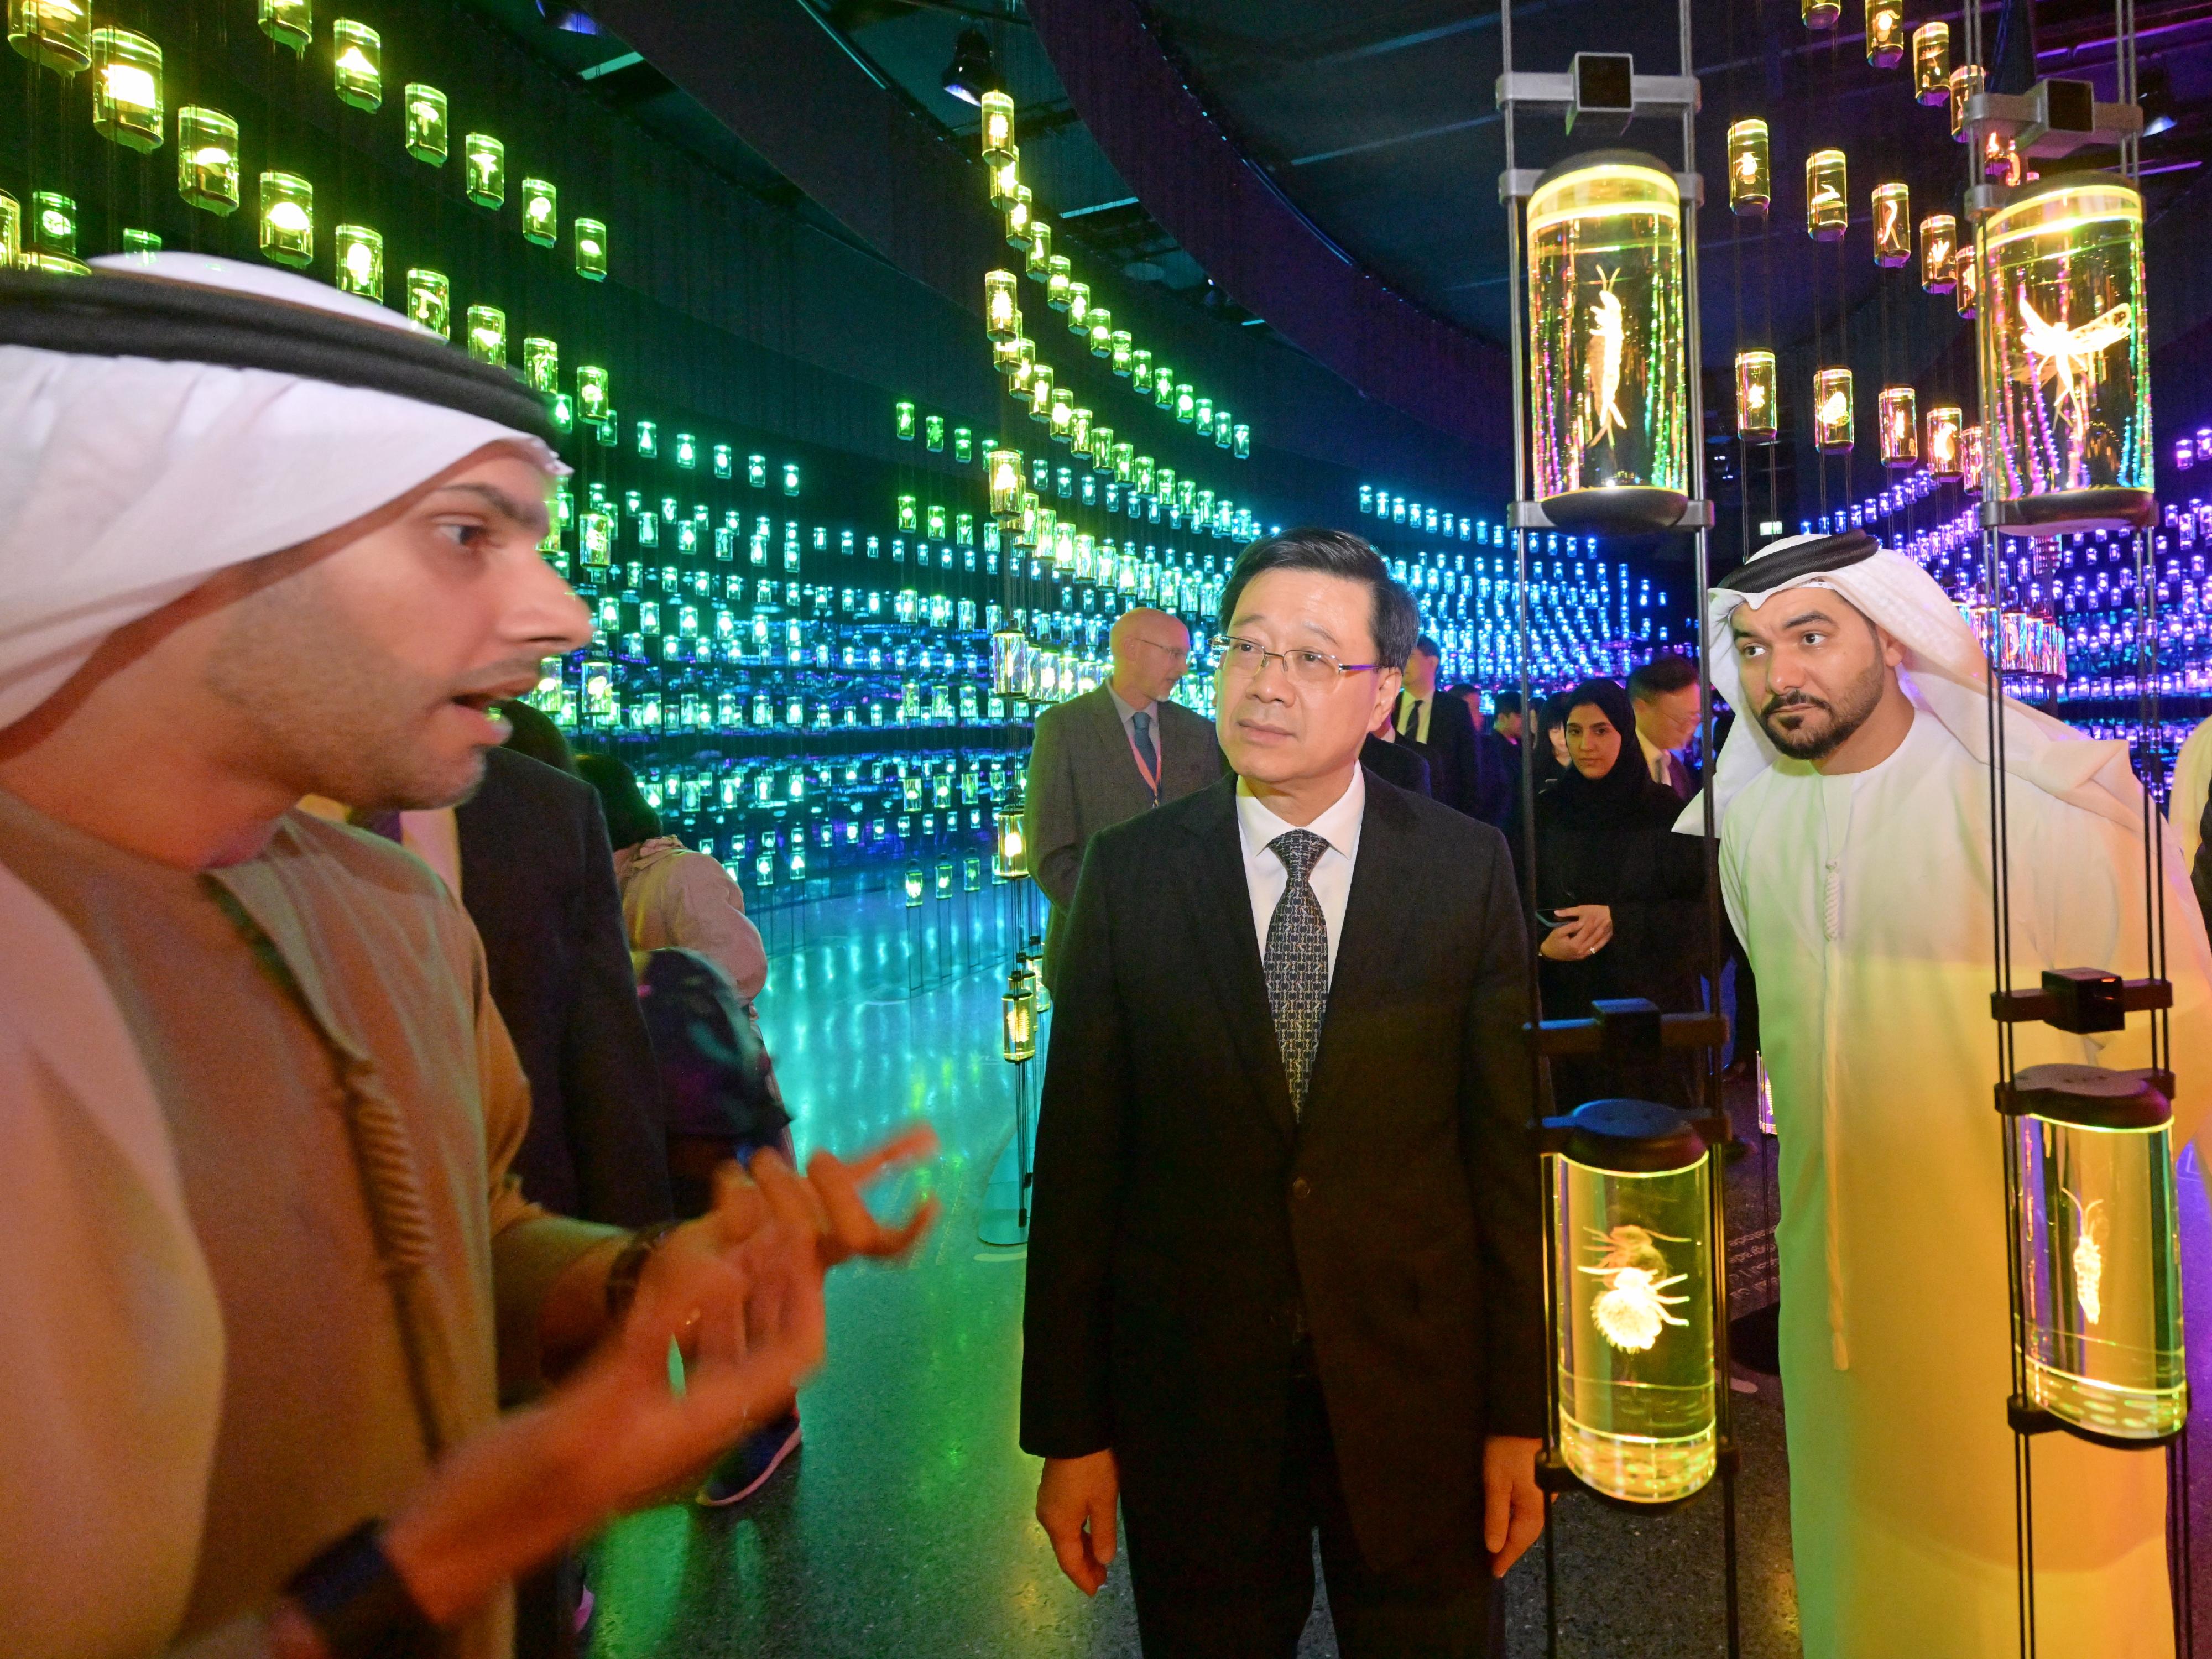 The Chief Executive, Mr John Lee, today (February 9, Dubai time) visited the Dubai Future Foundation, and toured the Museum of the Future of the foundation in Dubai, the United Arab Emirates. Photo shows Mr Lee (centre) listening to the briefing by museum staff.